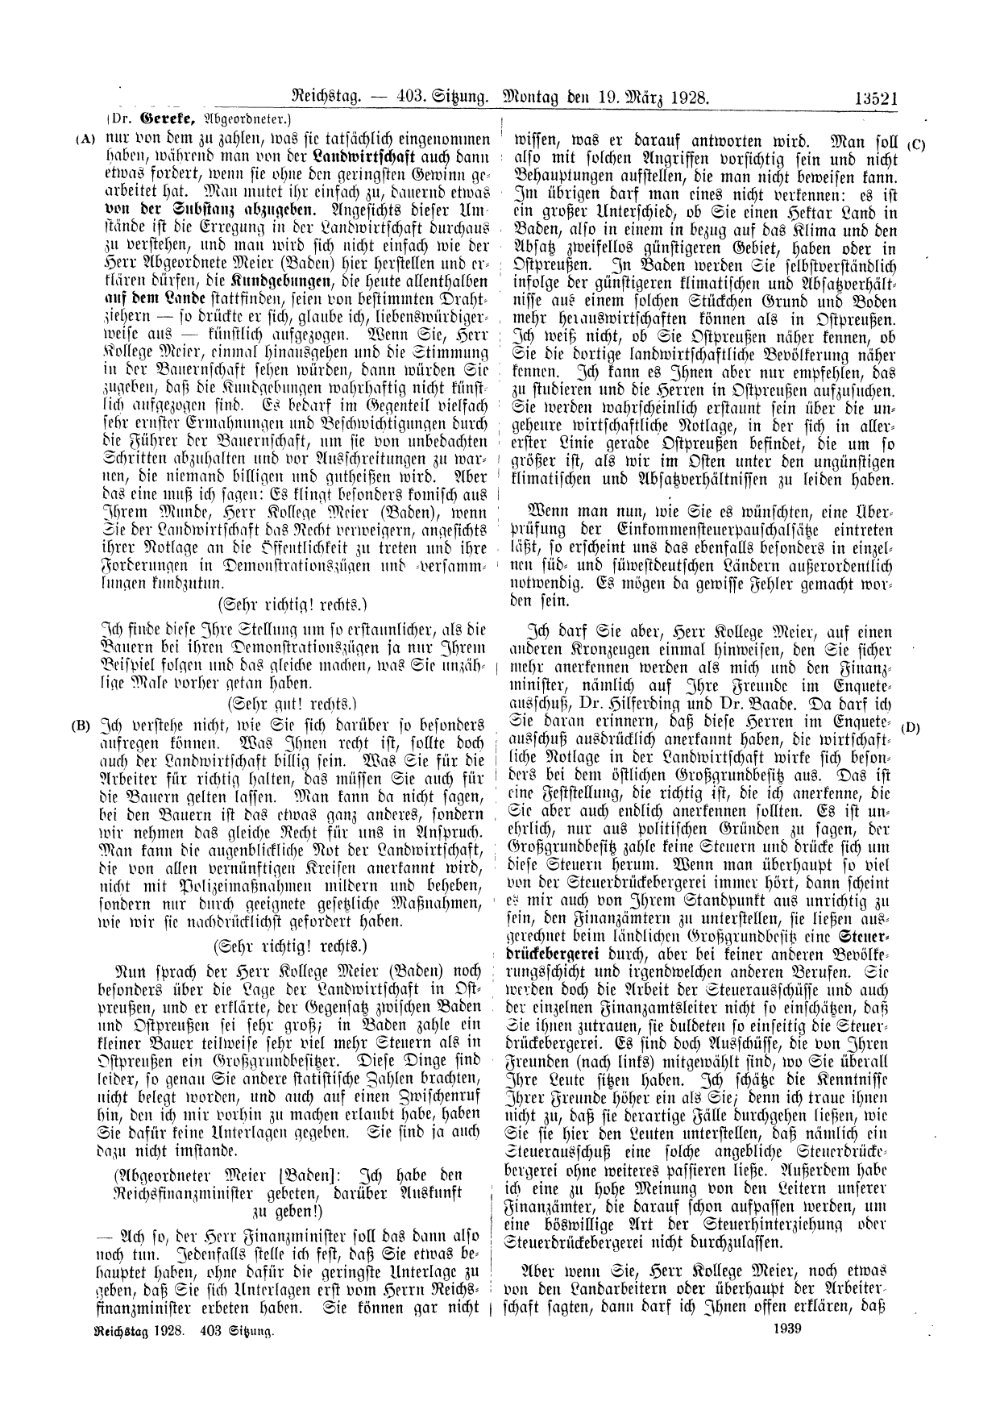 Scan of page 13521